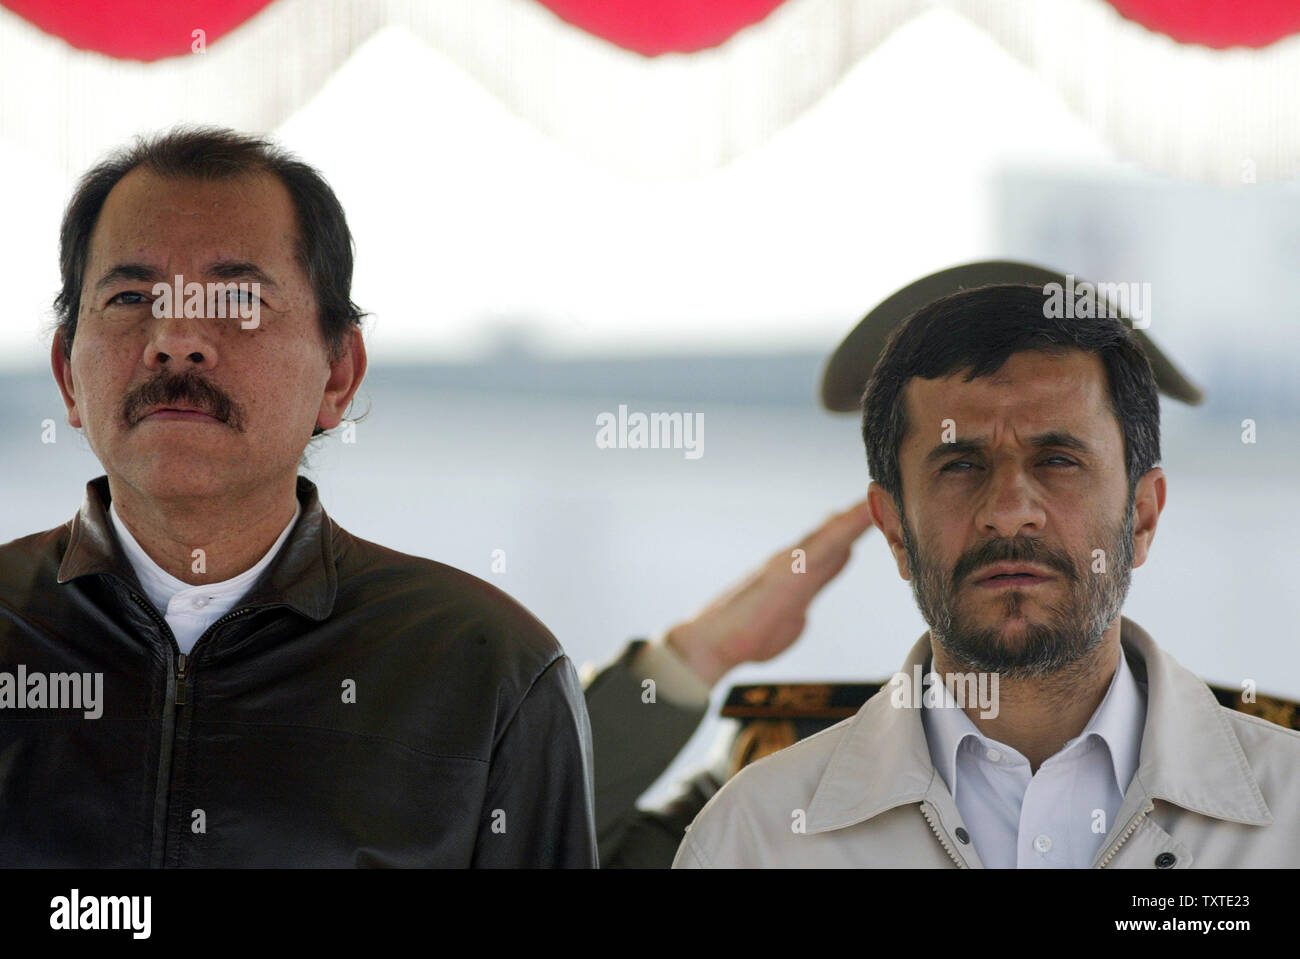 Nicaragua's President Daniel Ortega (L) and Iran's President Mahmoud Ahmadinejad listen to the national anthems of both countries after arriving at Mehrabad International Airport in Tehran, Iran on June 10, 2007. (UPI Photo/Mohammad Kheirkhah) Stock Photo